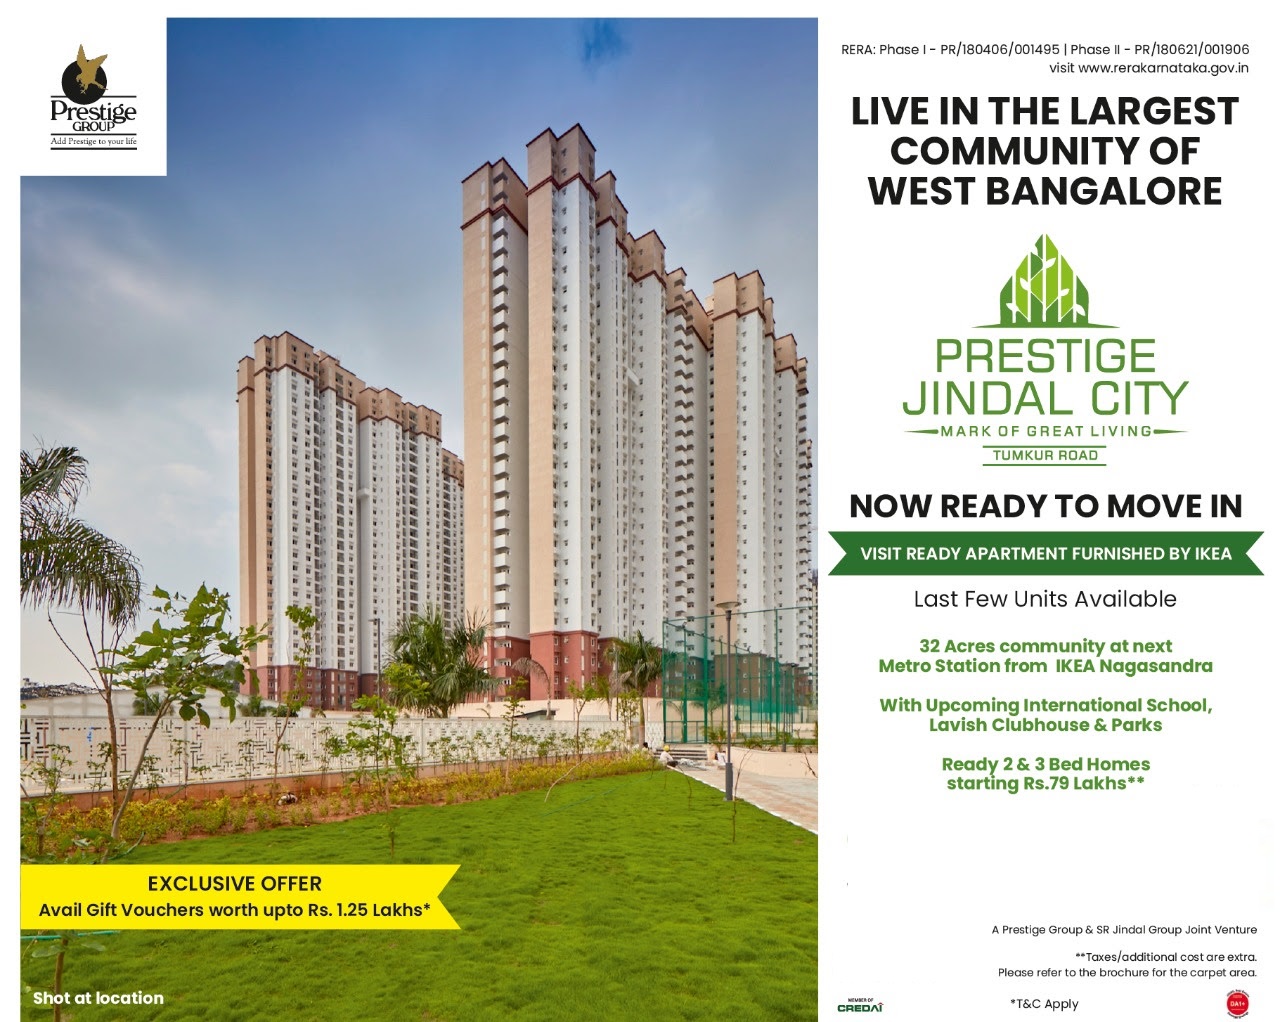 Last few units available at Prestige Jindal City in Tumkur Road, Bangalore Update